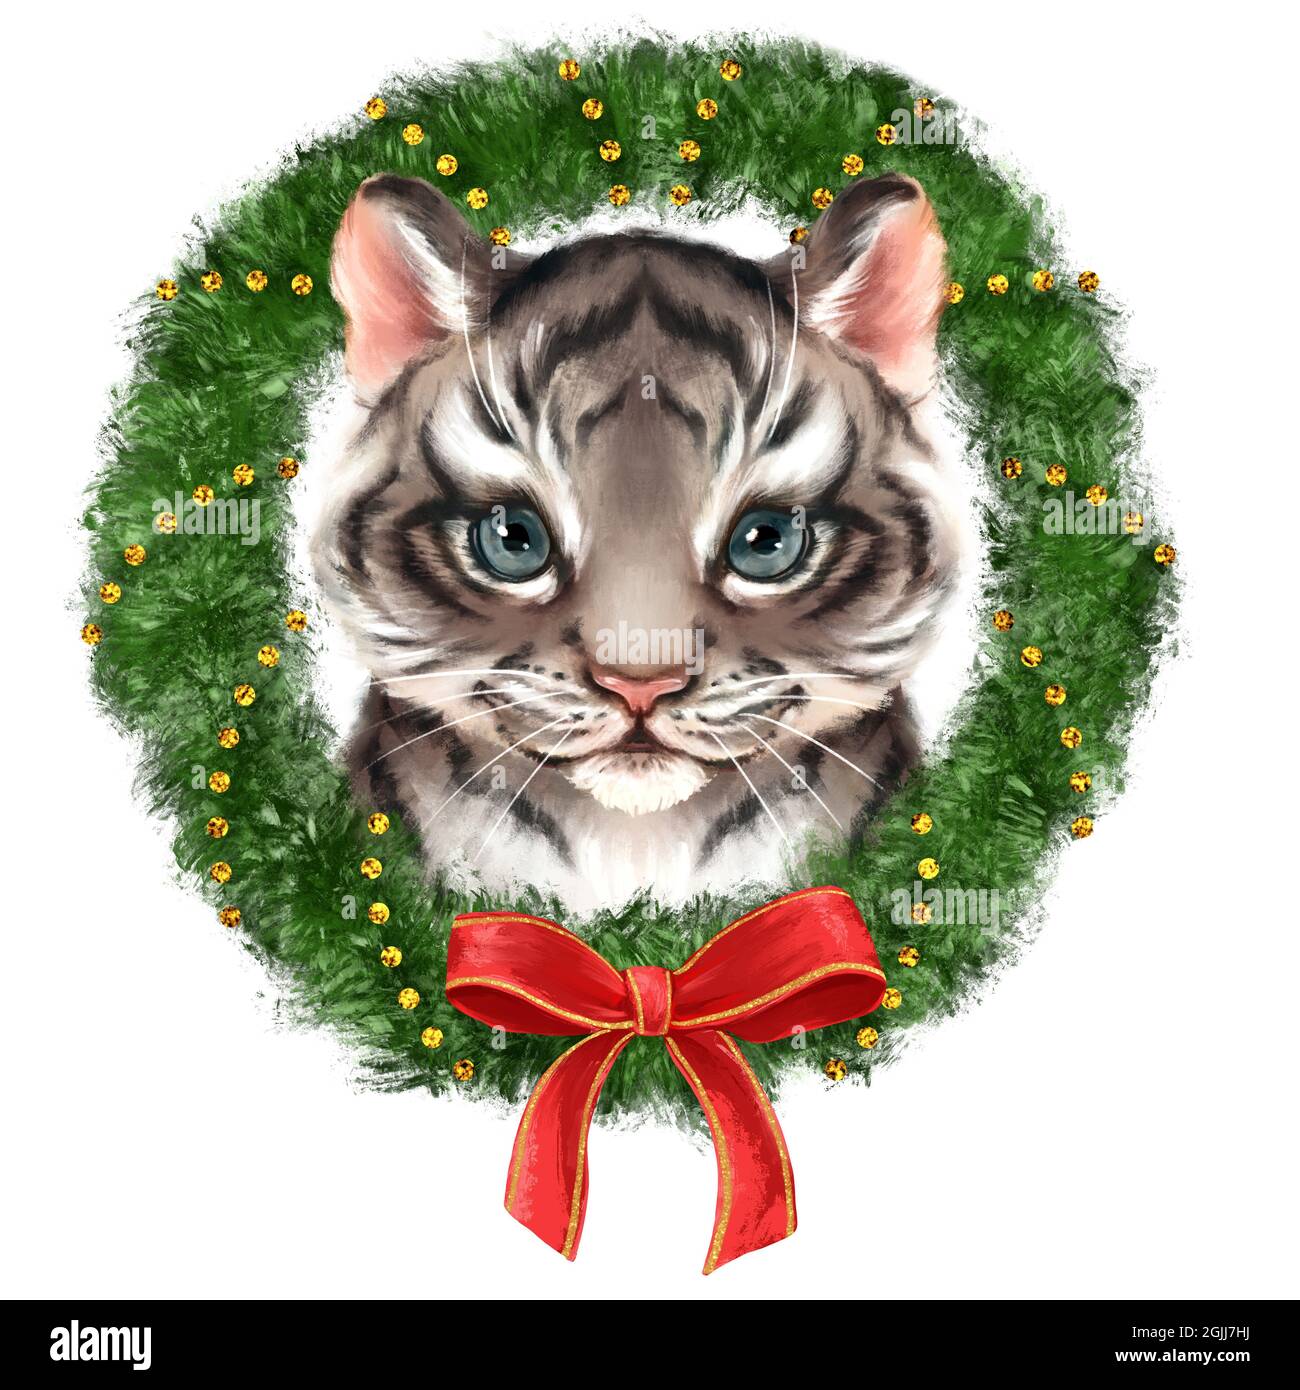 Cute tiger baby with Christmas wreath, portrait. Stock Photo